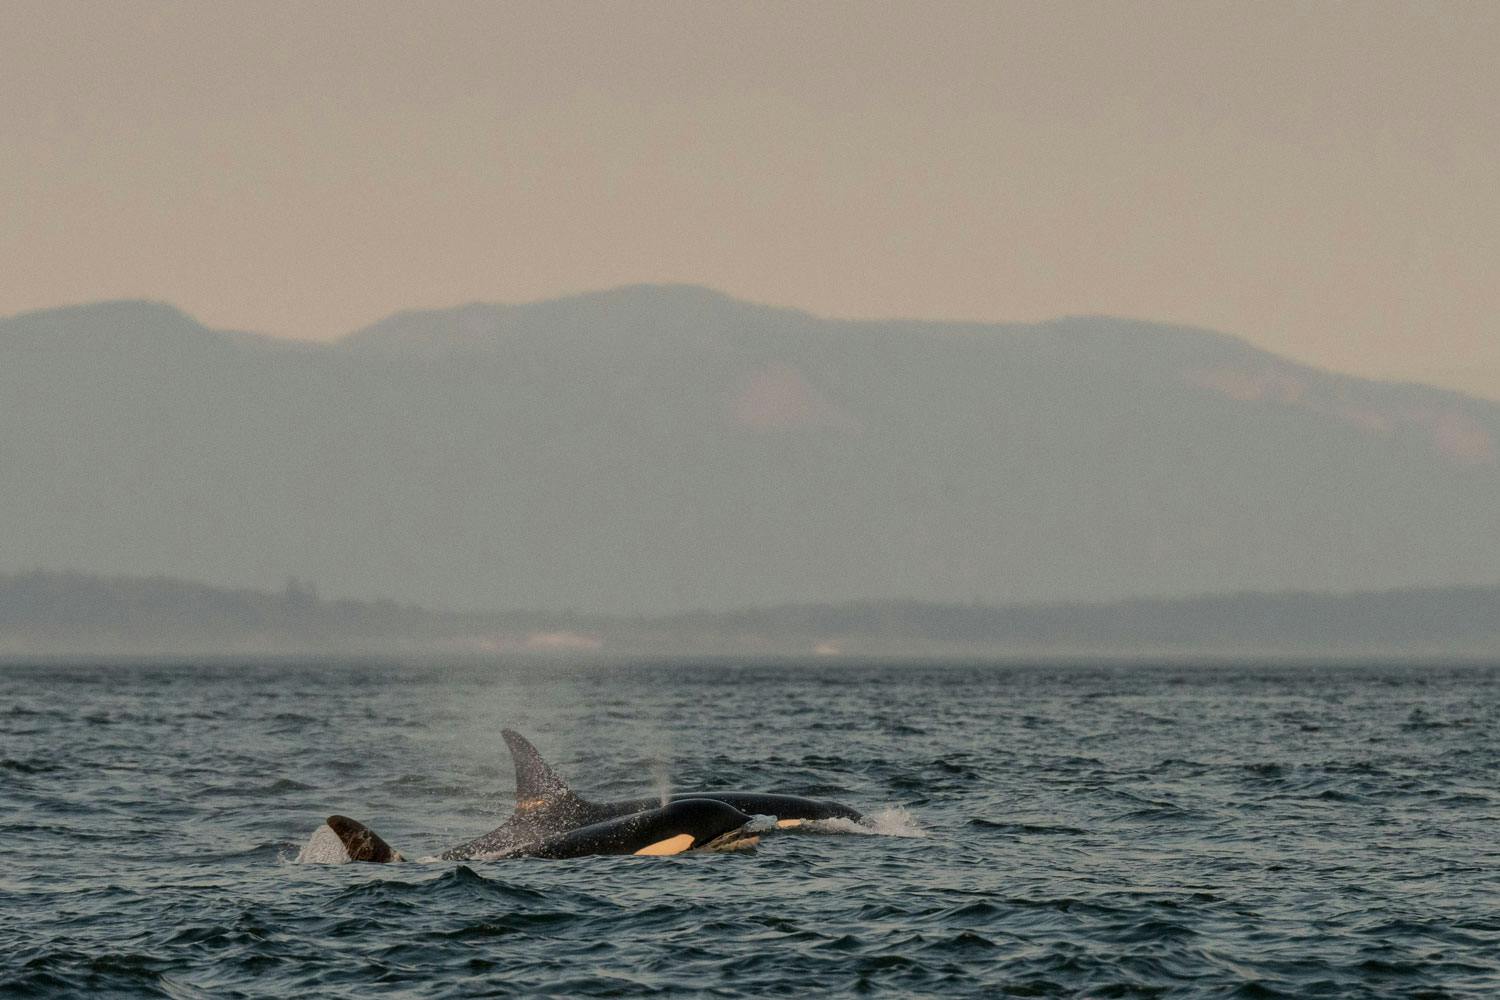 Two orcas surface, one spraying water from its blowhole. Mountains sit in the background, obscured by a light haze.